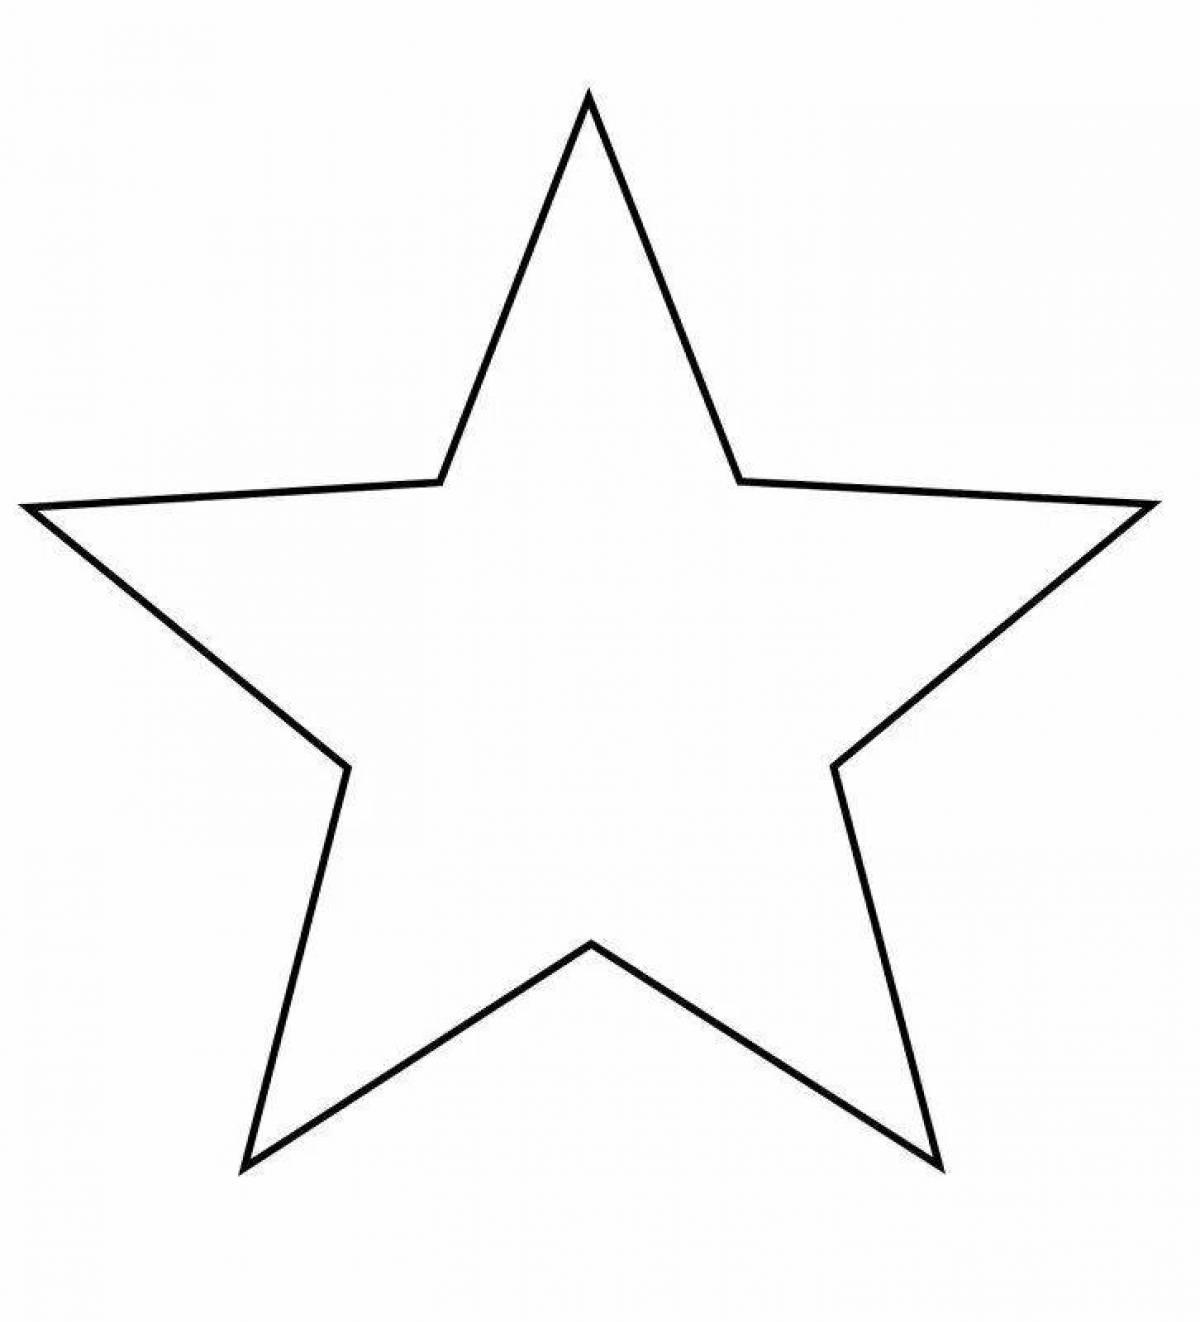 Fantastic coloring five-pointed star